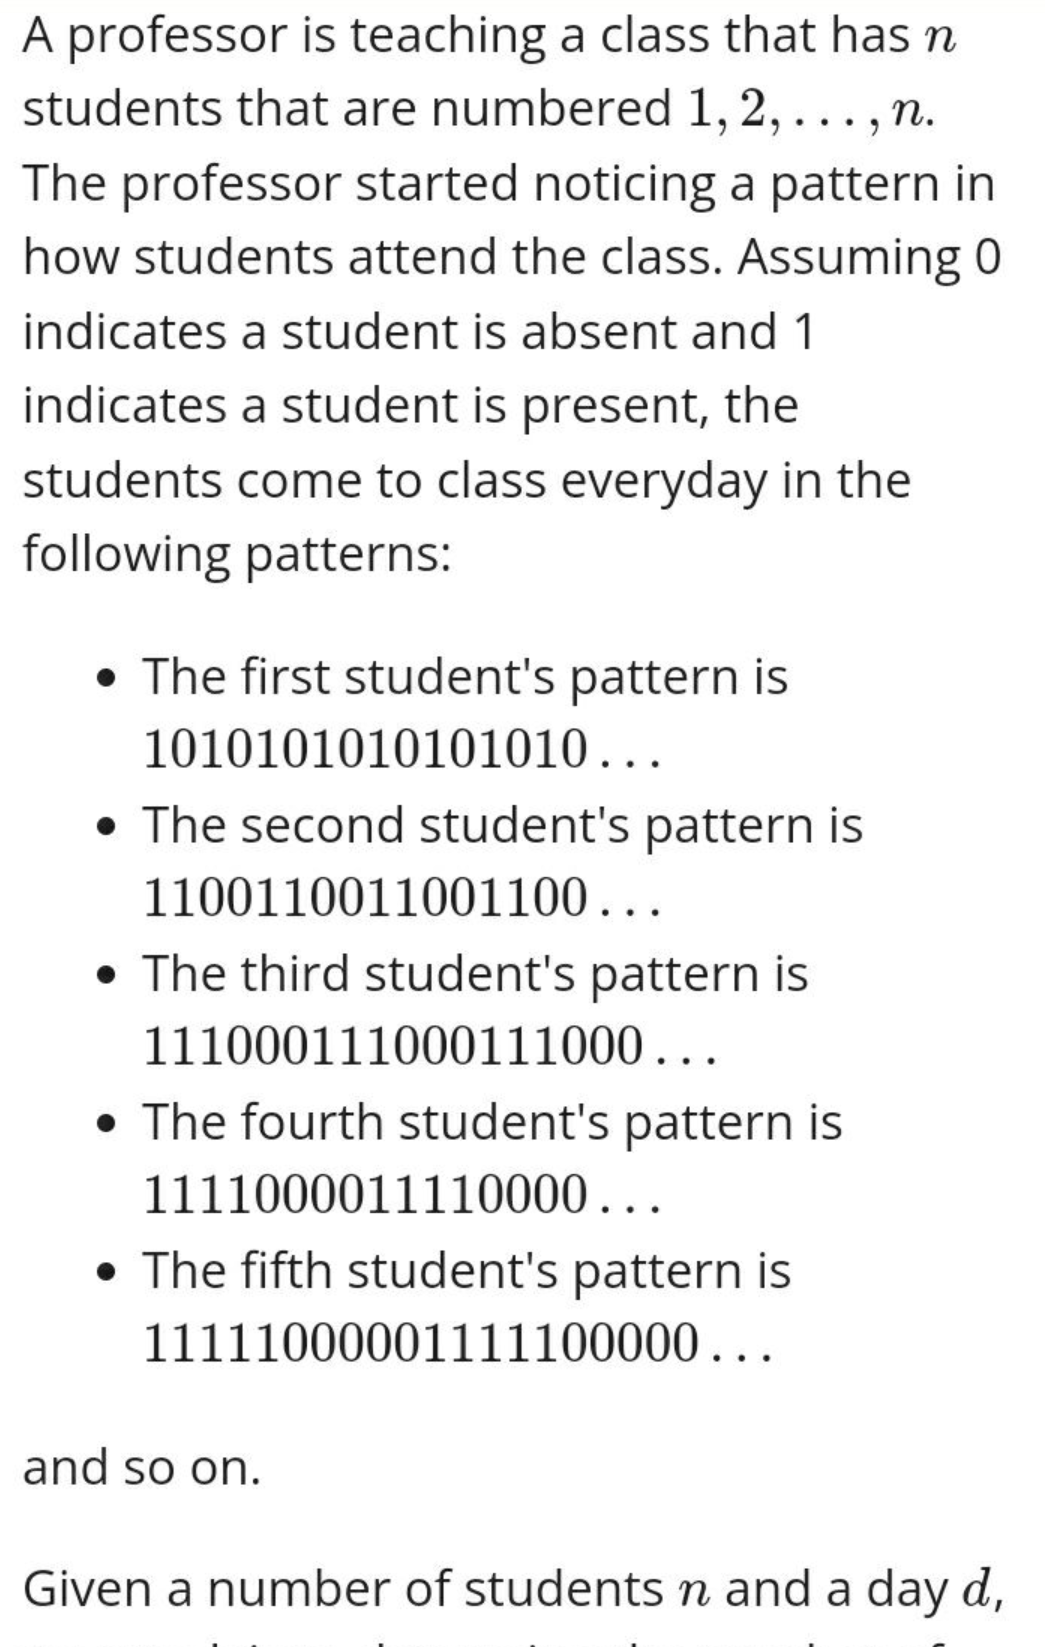 A professor is teaching a class that has n
students that are numbered 1, 2,..., n.
The professor started noticing a pattern in
how students attend the class. Assuming 0
indicates a student is absent and 1
indicates a student is present, the
students come to class everyday in the
following patterns:
• The first student's pattern is
1010101010101010...
• The second student's pattern is
1100110011001100...
• The third student's pattern is
111000111000111000...
• The fourth student's pattern is
1111000011110000...
The fifth student's pattern is
11111000001111100000...
and so on.
Given a number of students n and a day d,